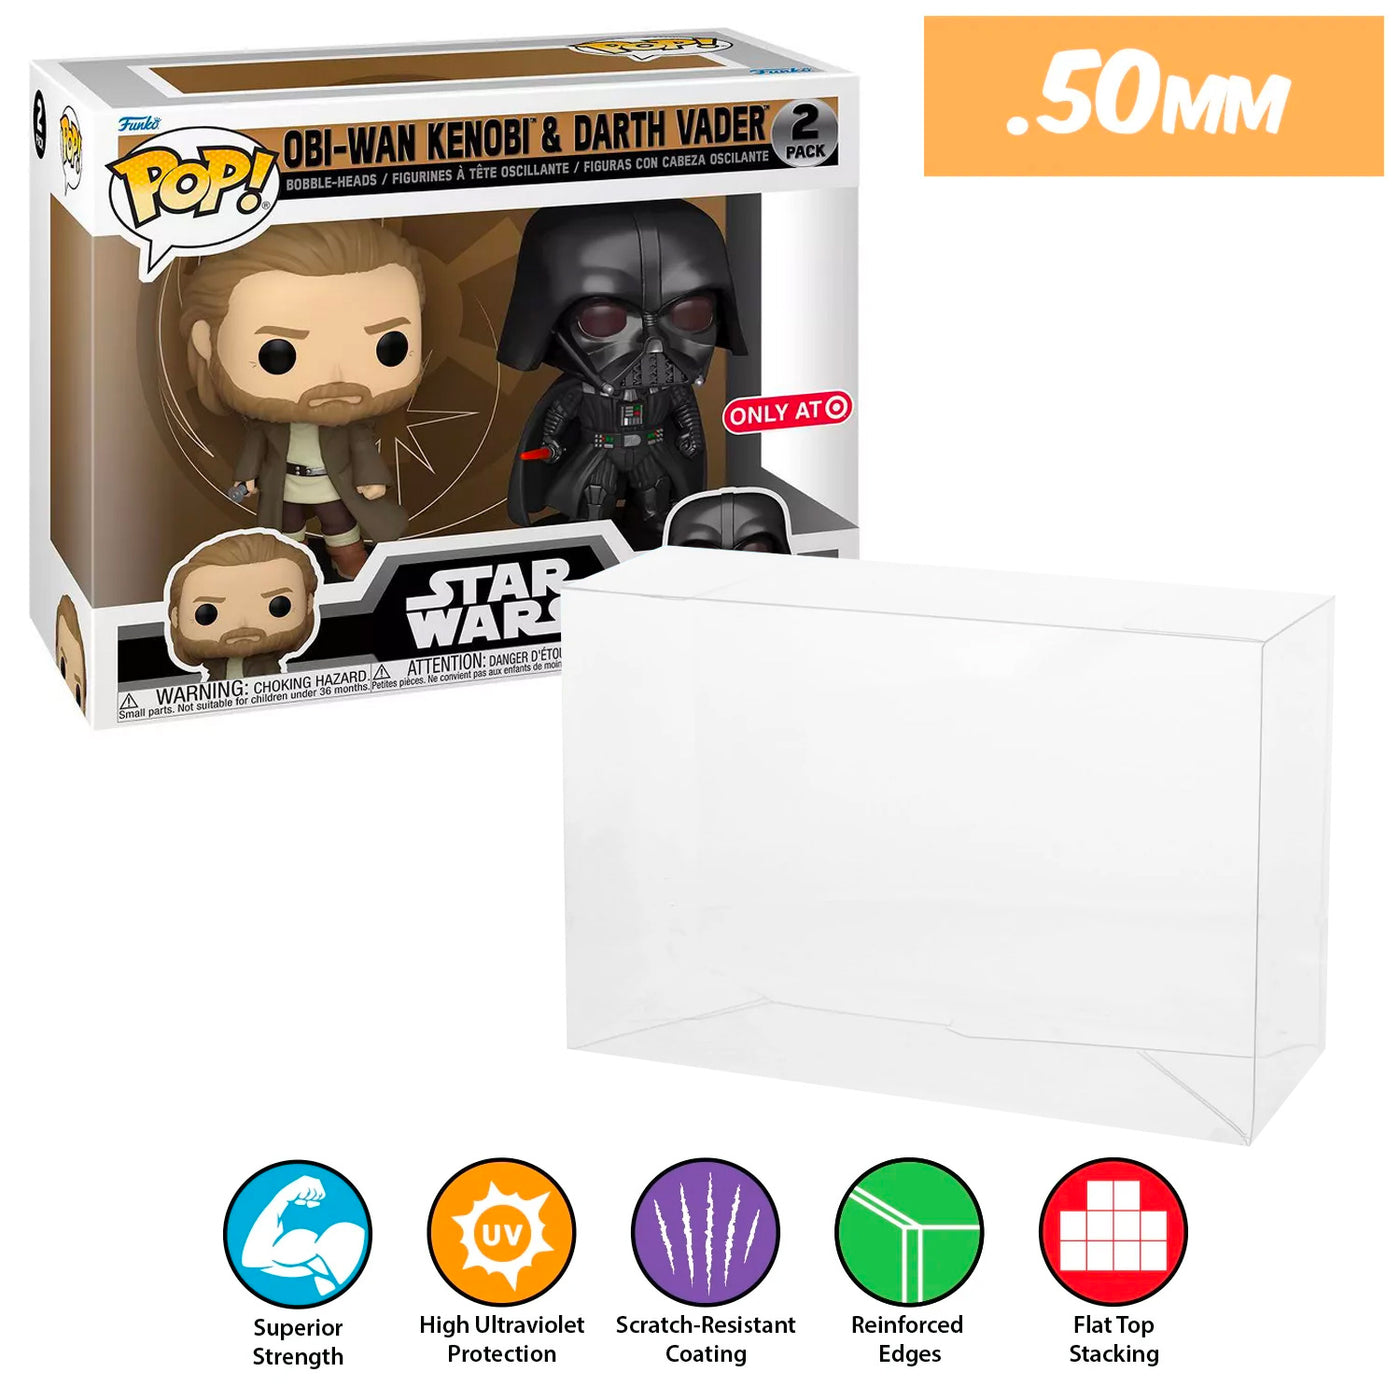 obi-wan kenobi darth vader 2 pack best funko pop protectors thick strong uv scratch flat top stack vinyl display geek plastic shield vaulted eco armor fits collect protect display case kollector protector